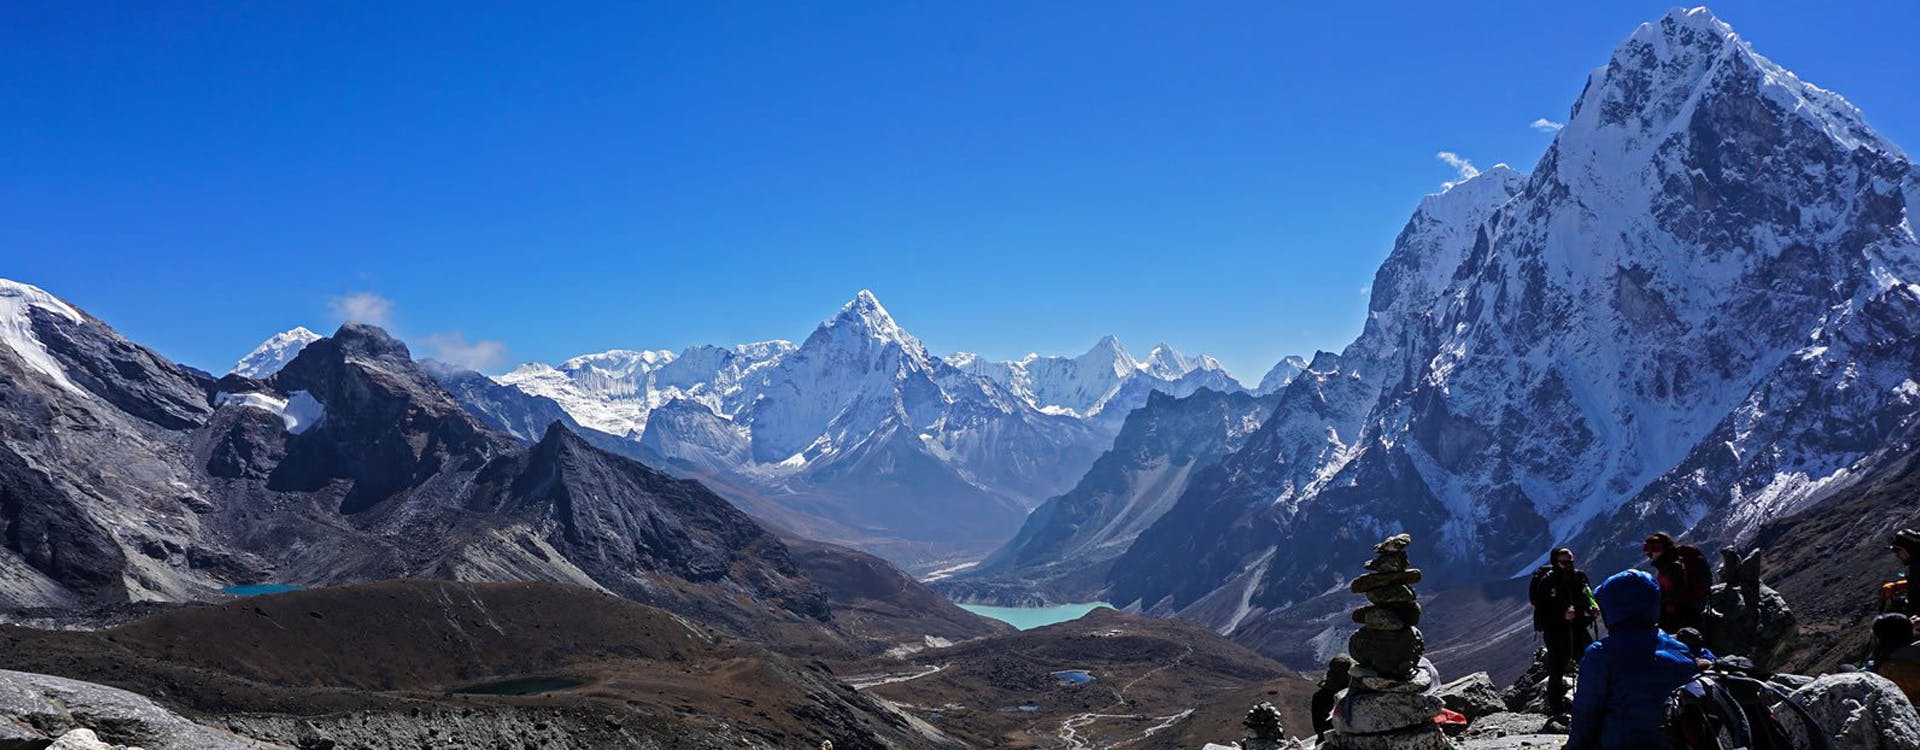 Nepal Hiking Team 65% 4.5 / 5 Progress MENU Users Categories Articles Menu Team Testimonials FAQS BLOGS Authors Blogs Comments TRAVEL Package Itinerary Departure Tripnote Booking MEDIA Album Media Search Your Query EBC with Gokyo Lake Heli Shuttle Trek